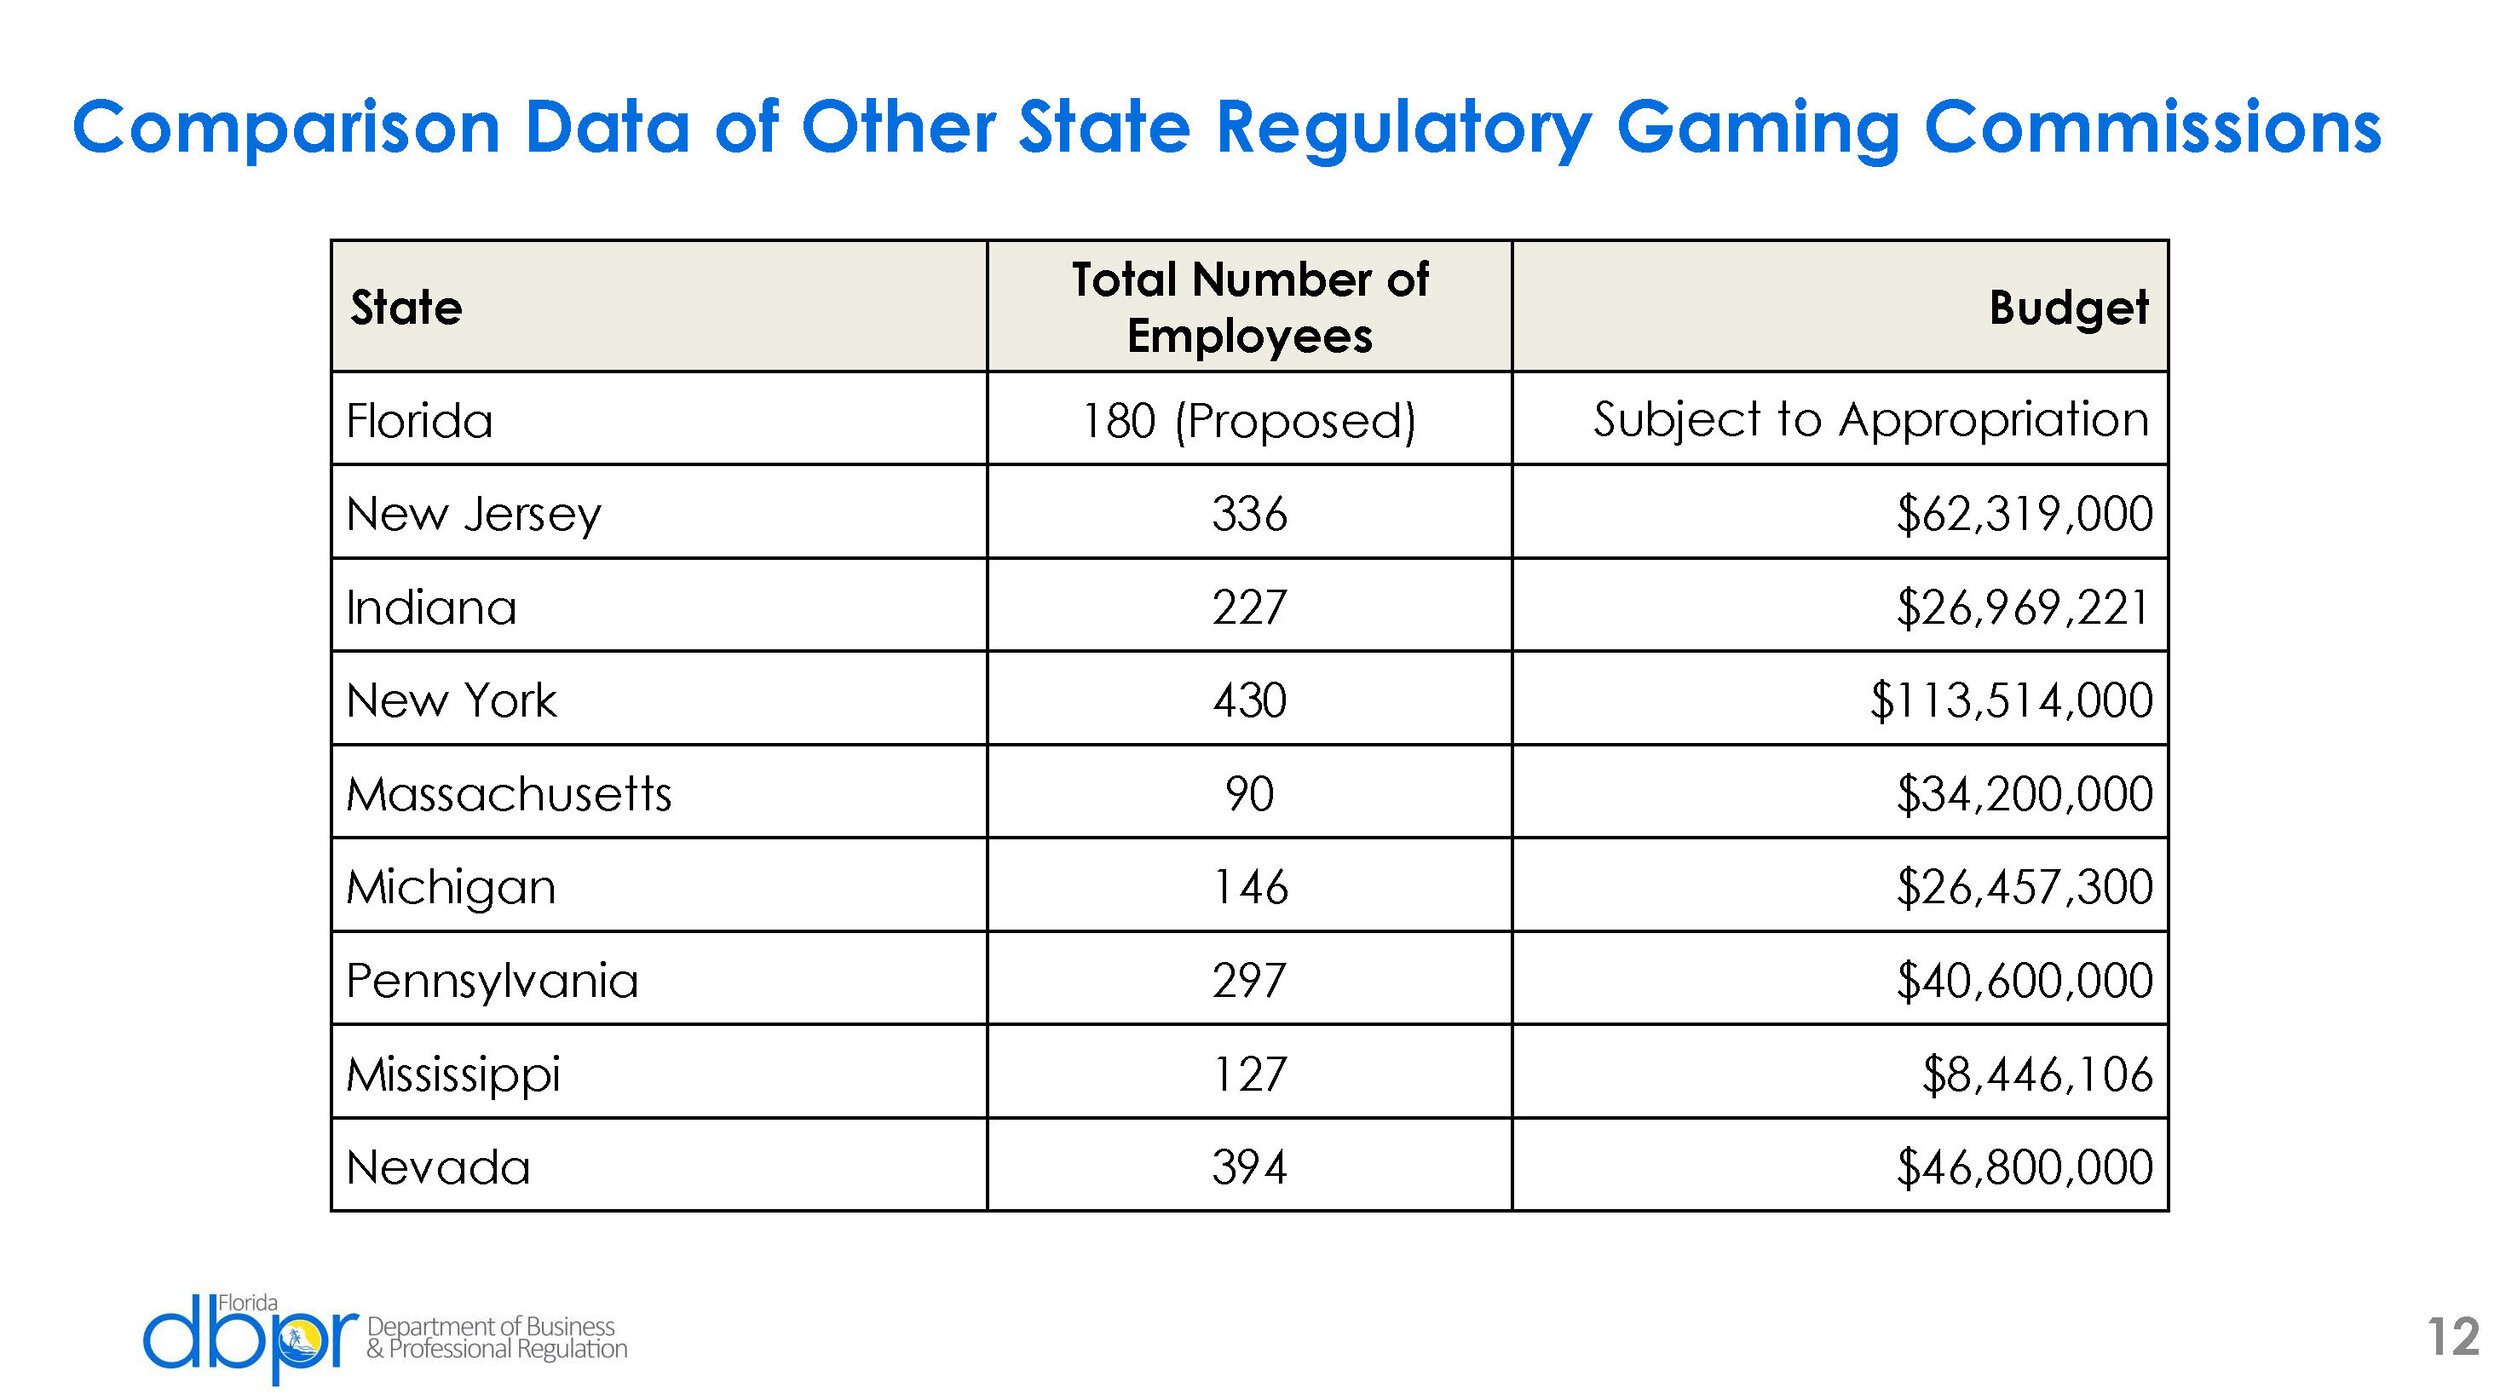 Florida Gaming Control Commission LBR 22-23_Page_12.jpg